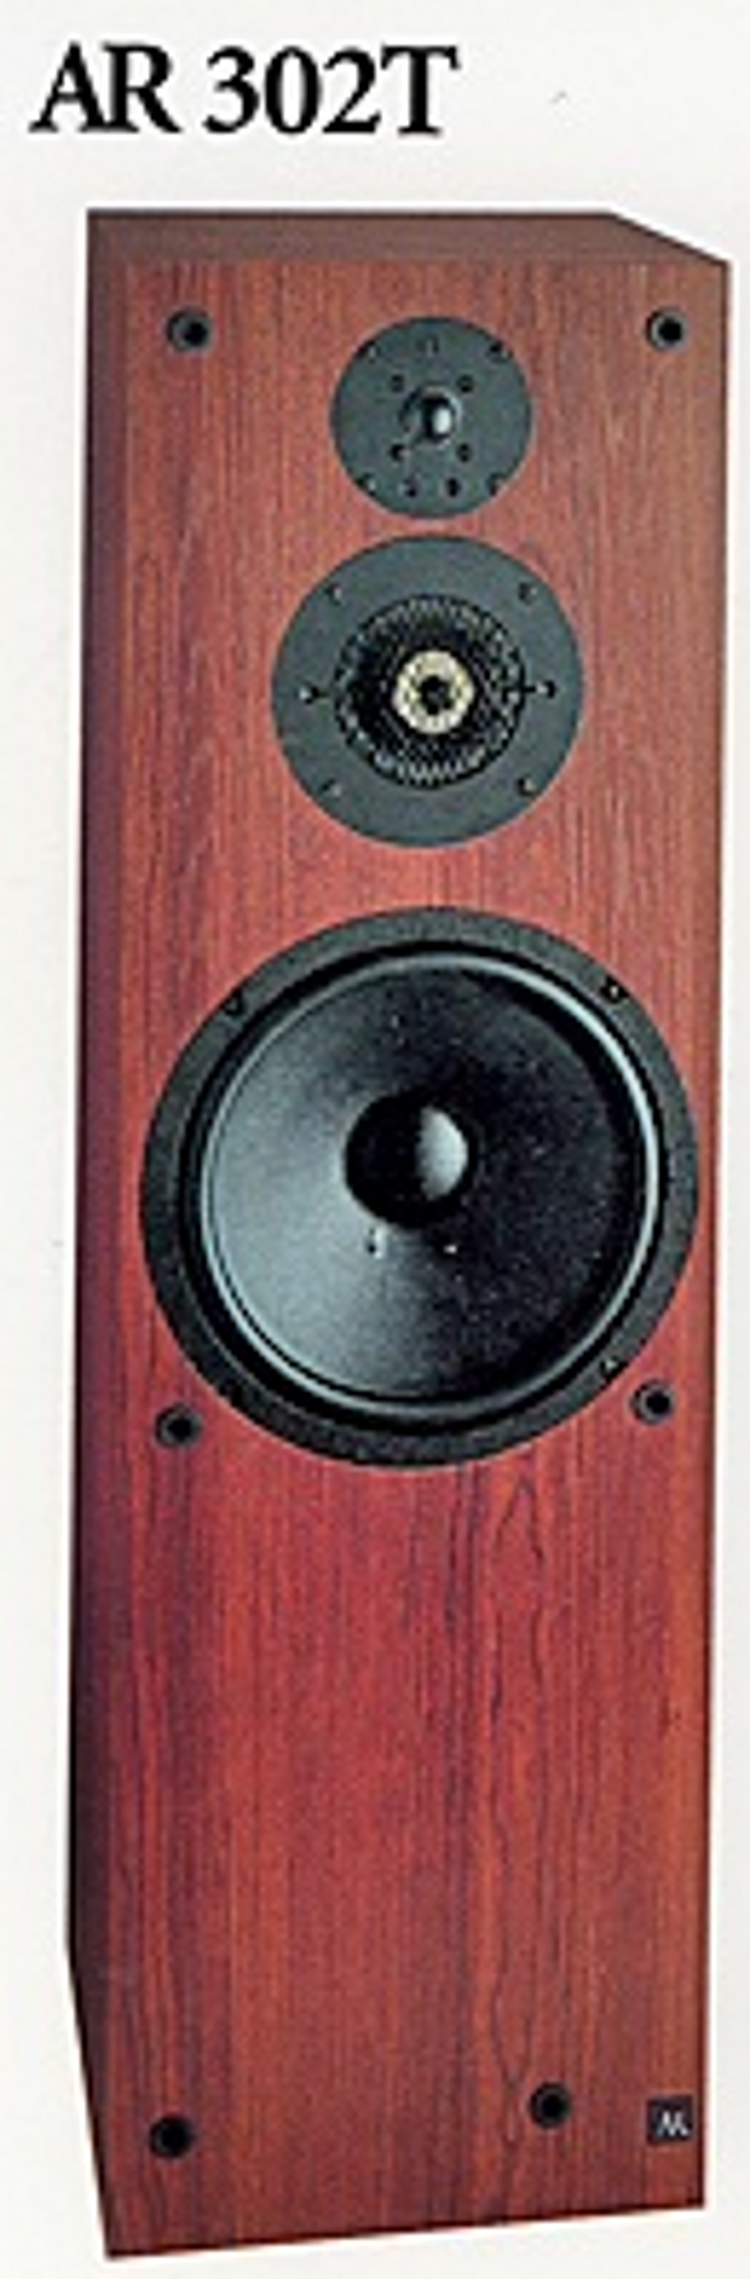 The AR-302T tower speaker using the same driver and crossover.